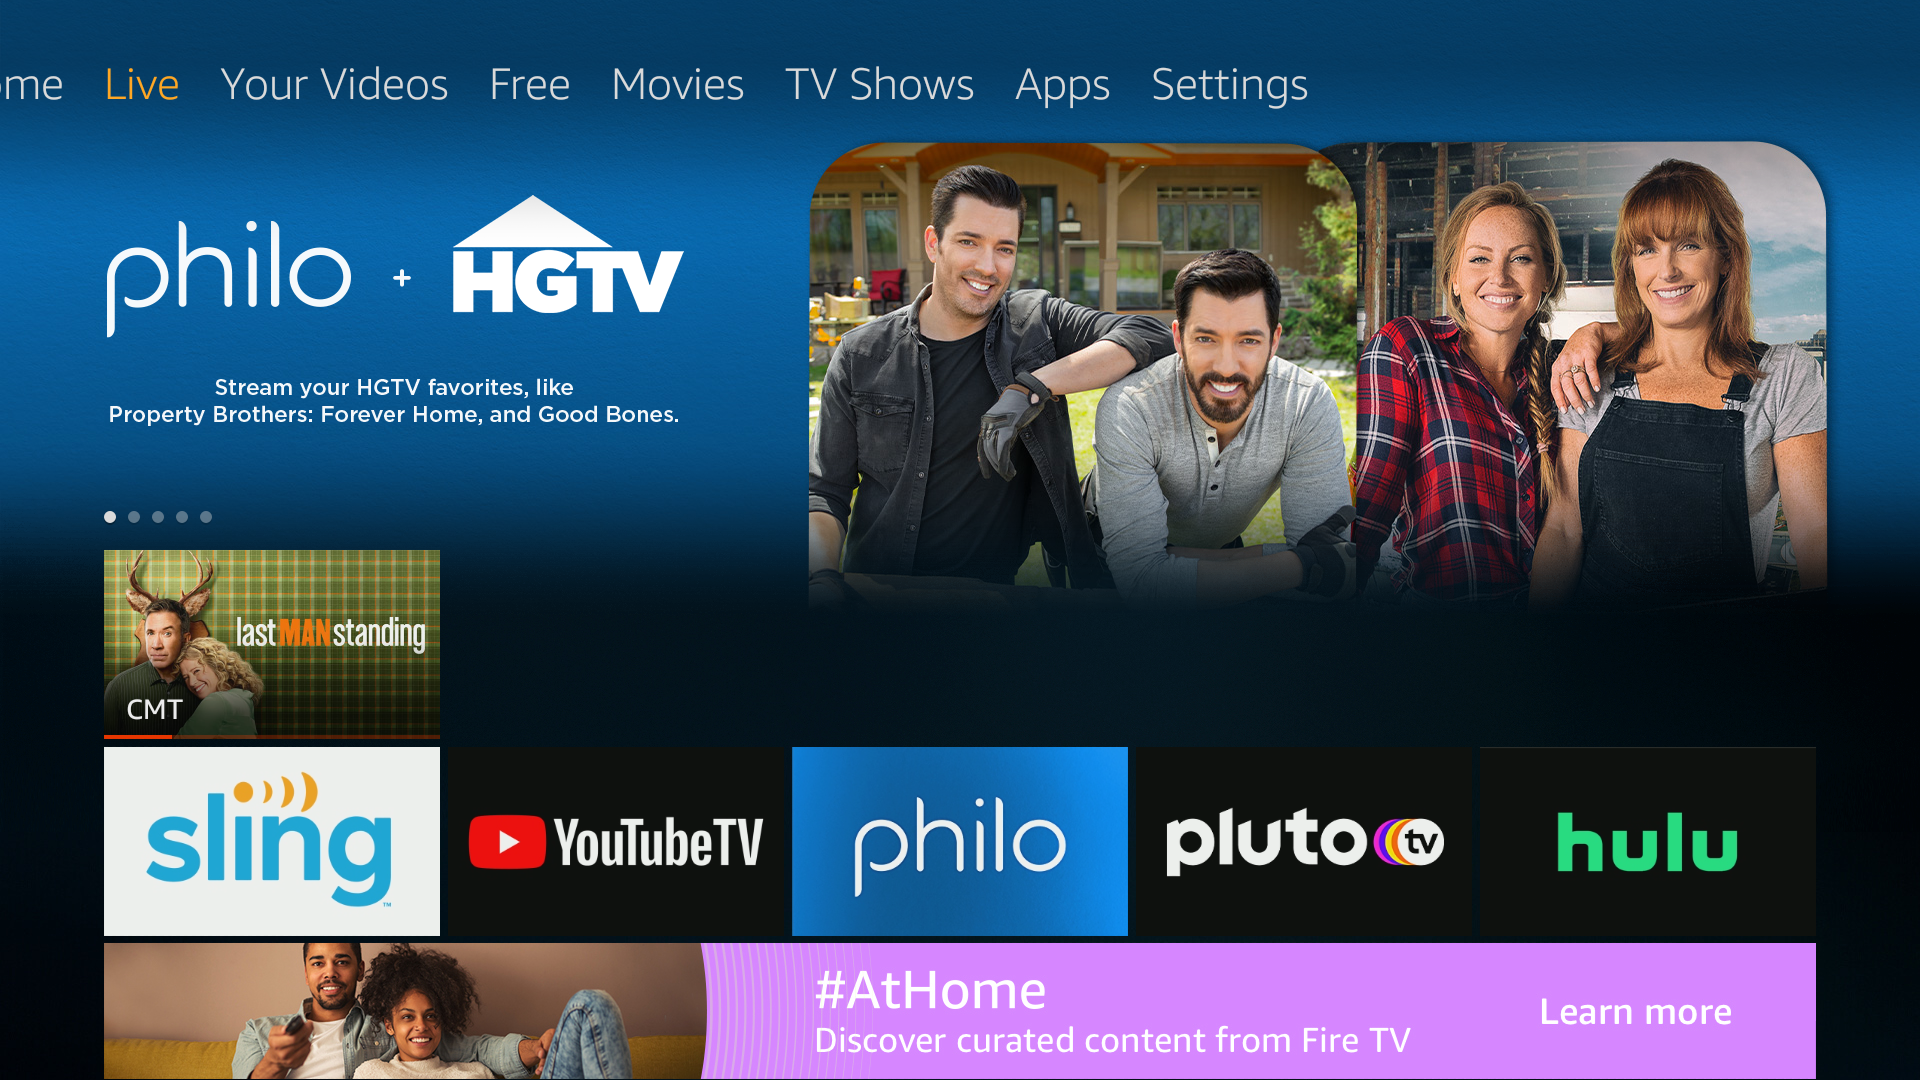 'Philo and HGTV ad featured on Amazon Fire Live TV'